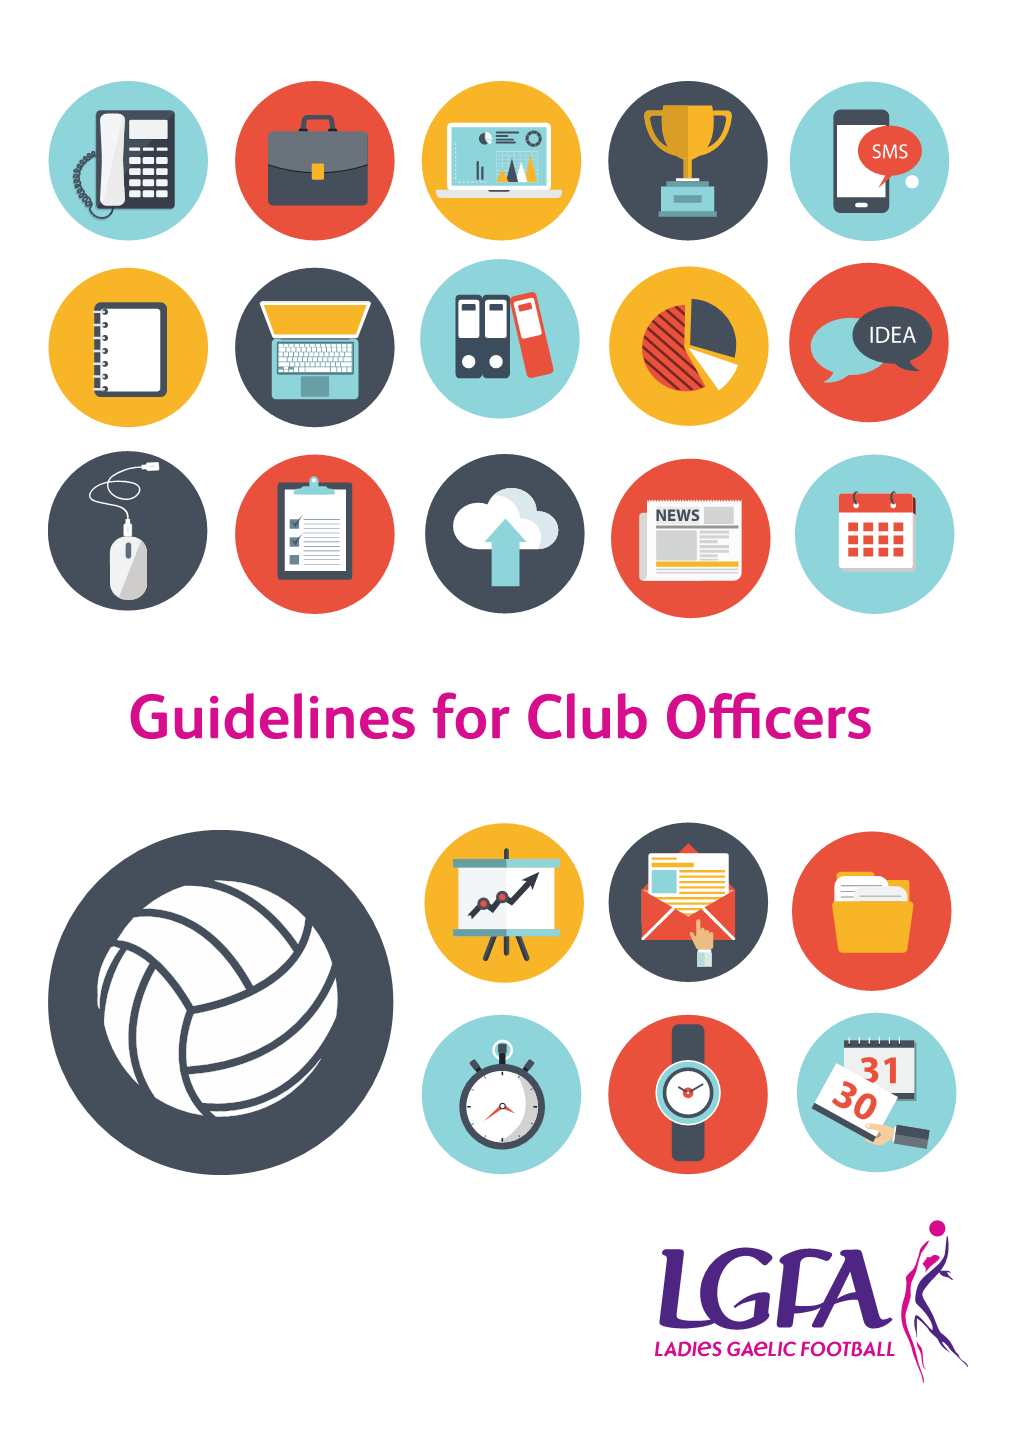 Guidelines for Club Officers Contents